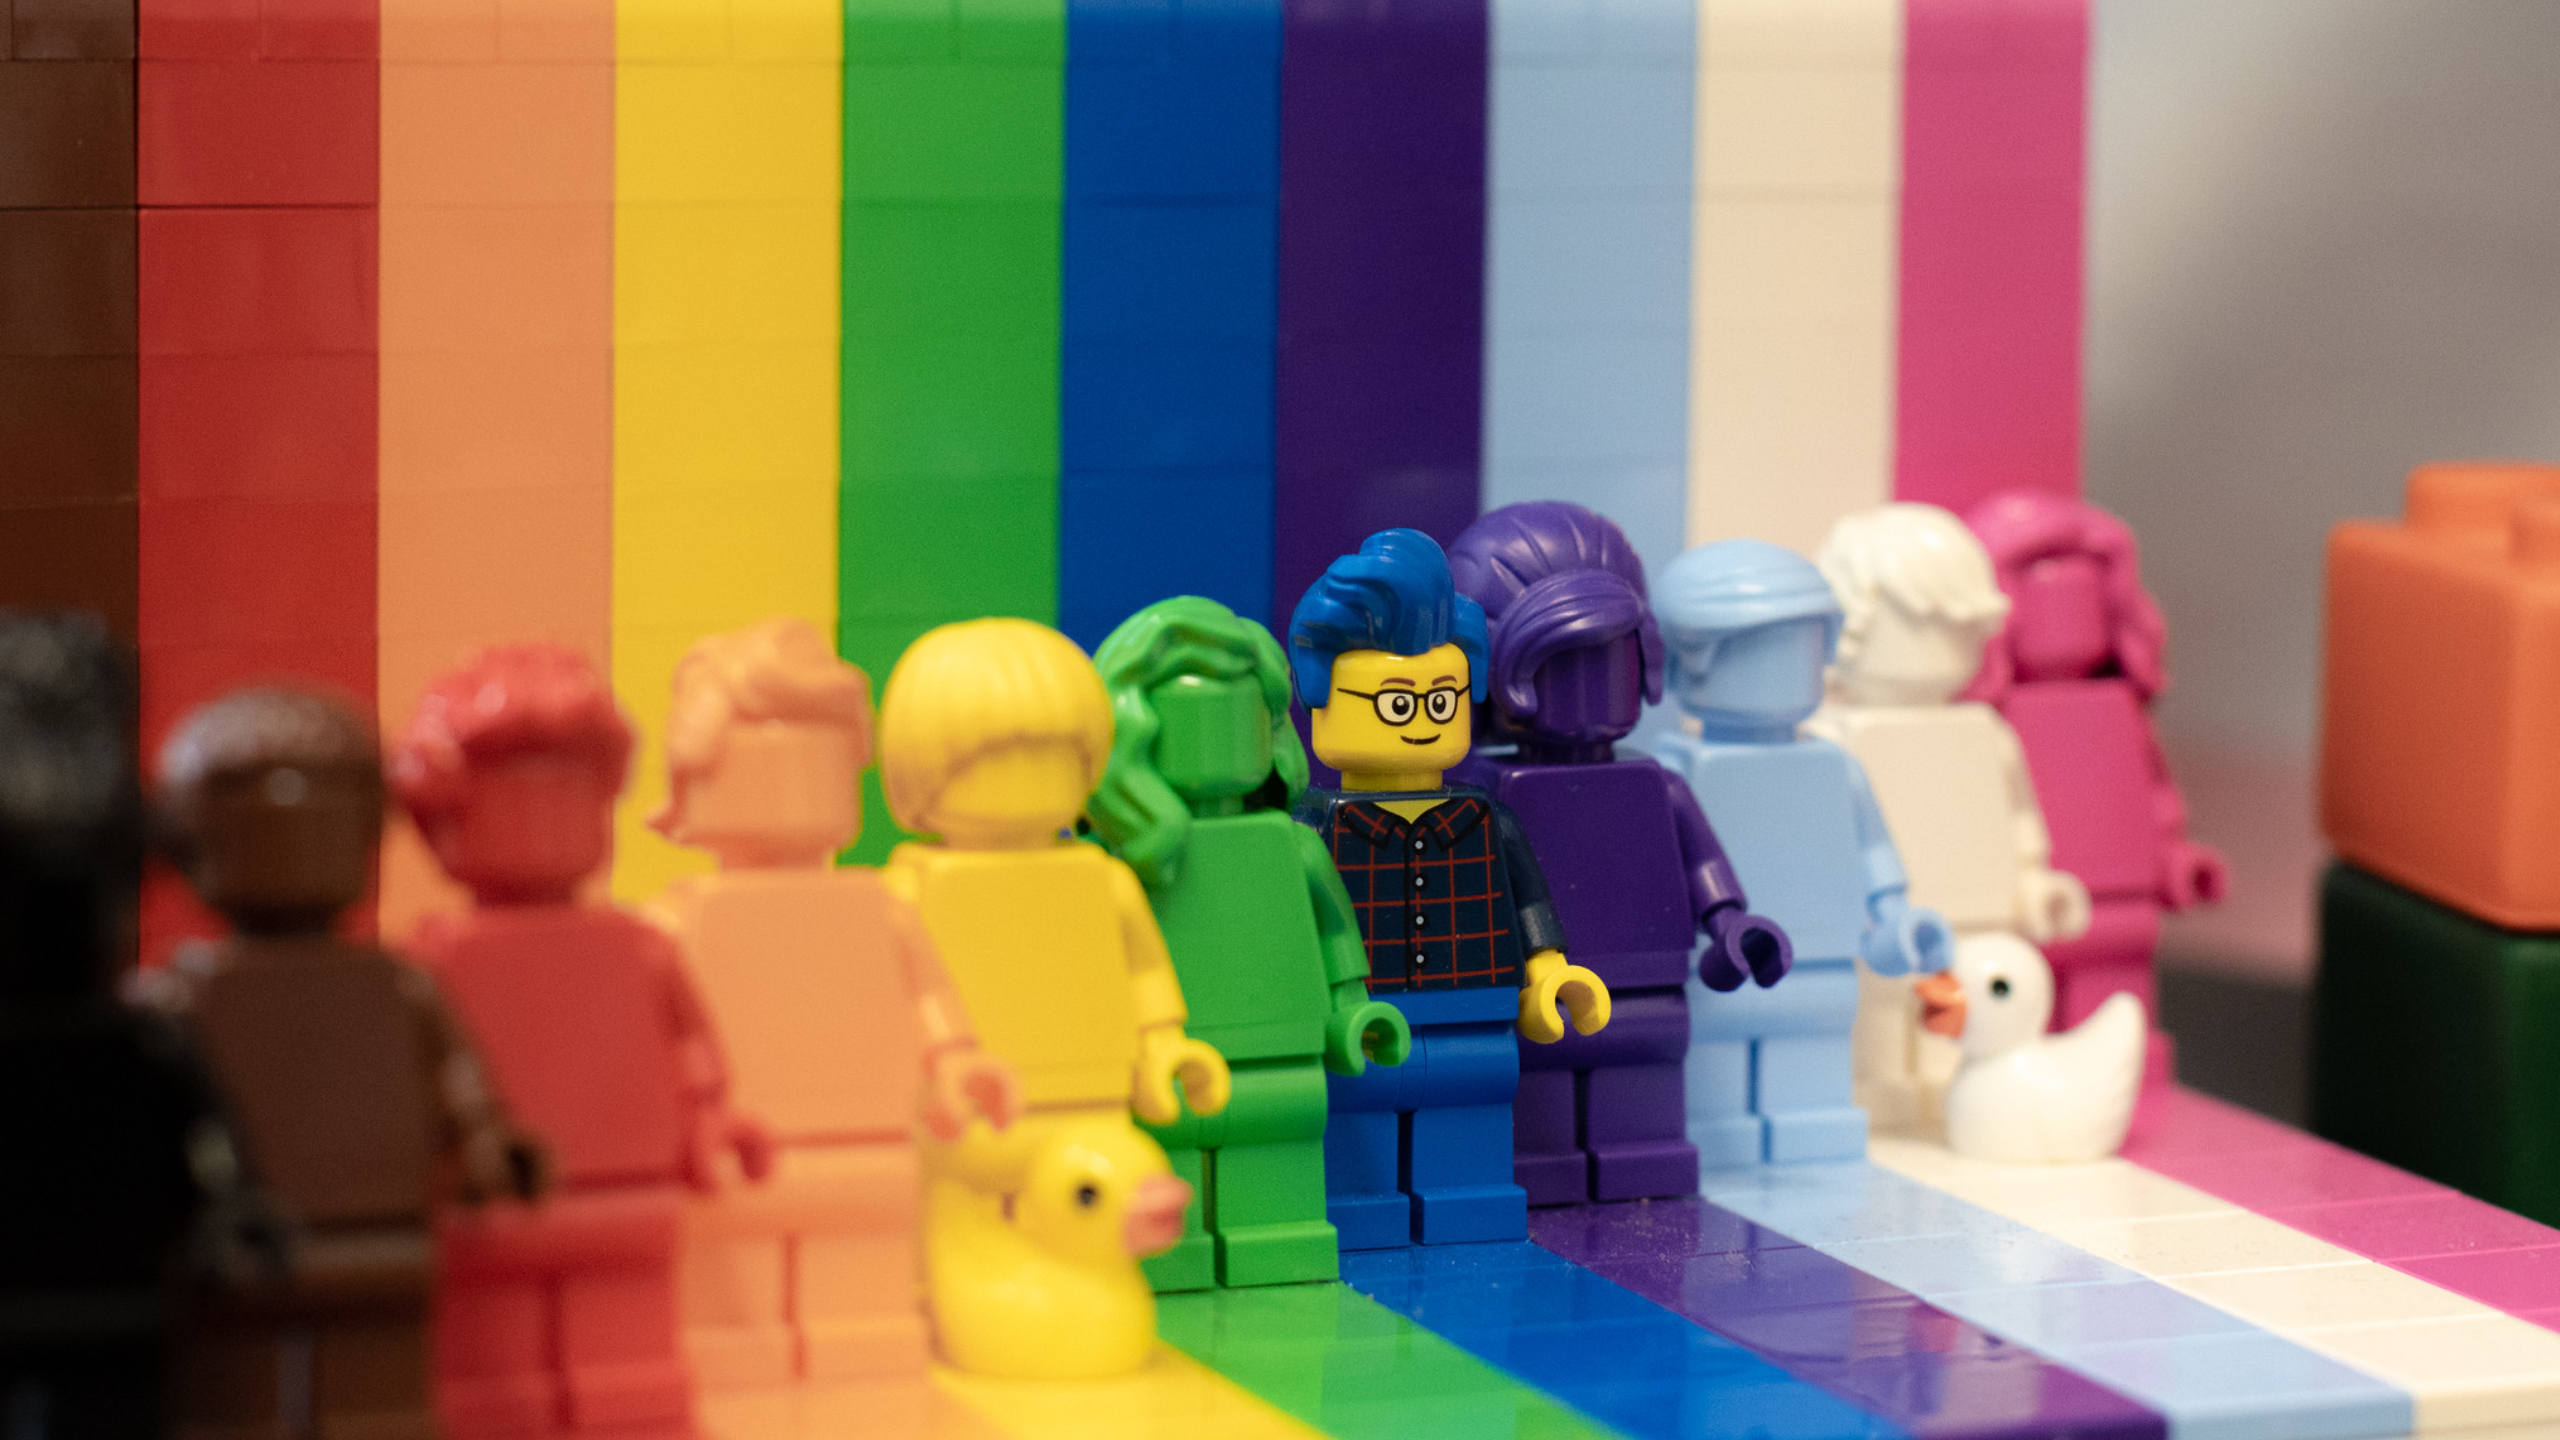 Lego figures in all colors of the rainbow, lined side by side